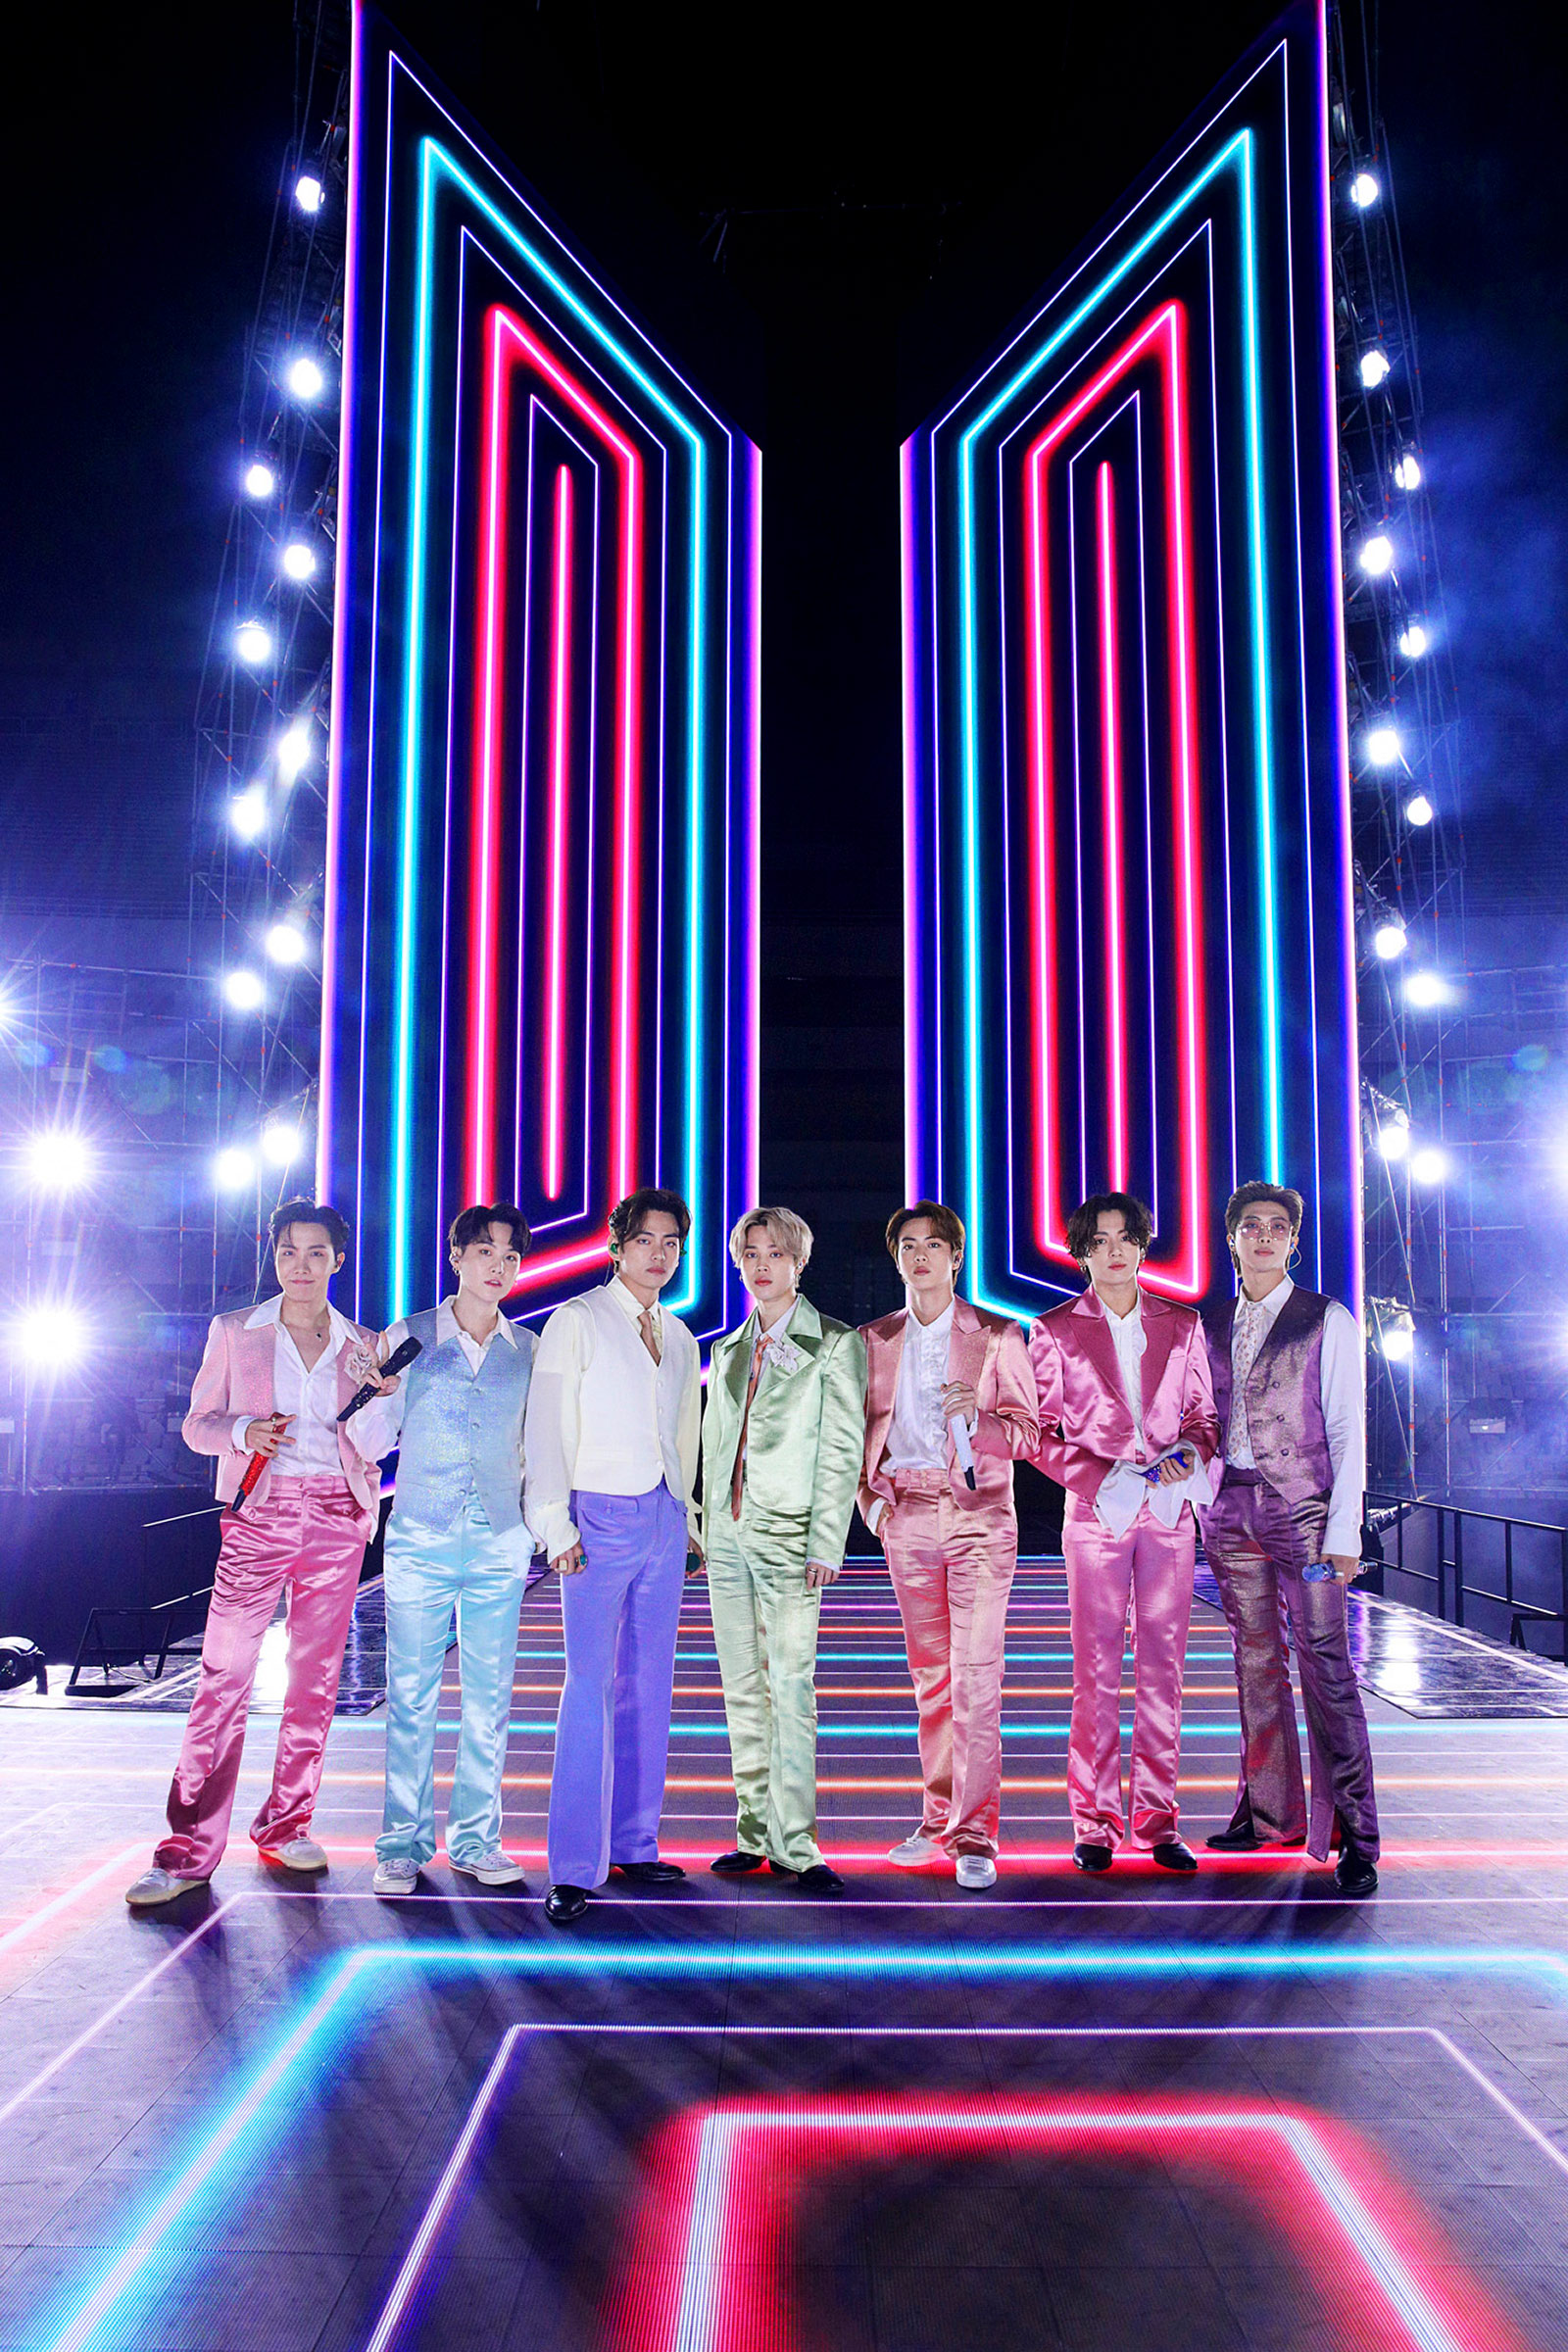 BTS perform onstage for the 2020 American Music Awards in South Korea on Nov. 22, 2020. (Getty Images)